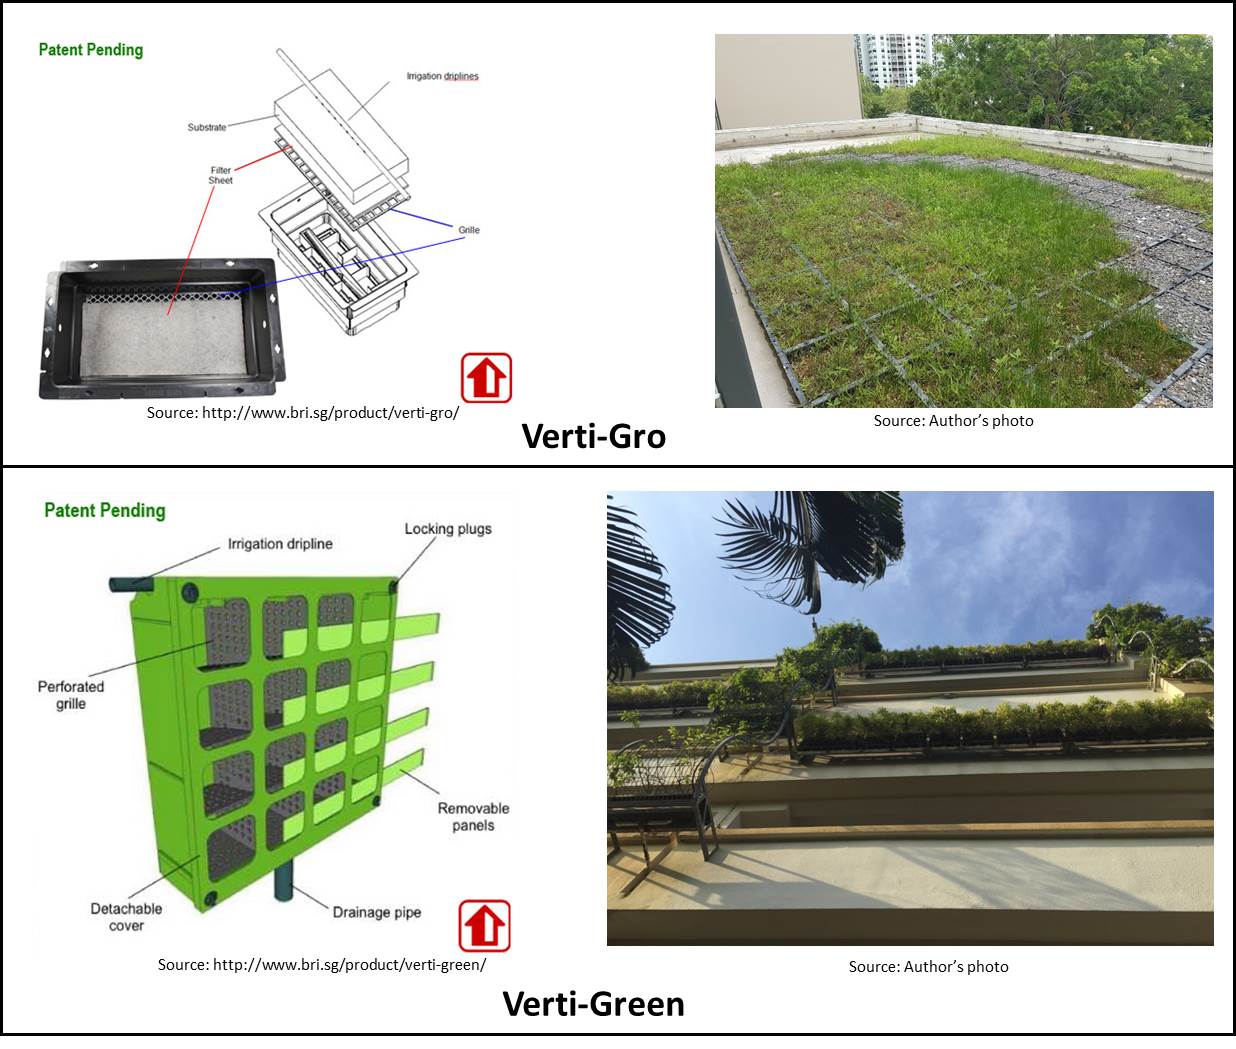 Figure 4. Vertical Greenery Systems in Singapore (Photo source: Chew and Conejos, 2016)